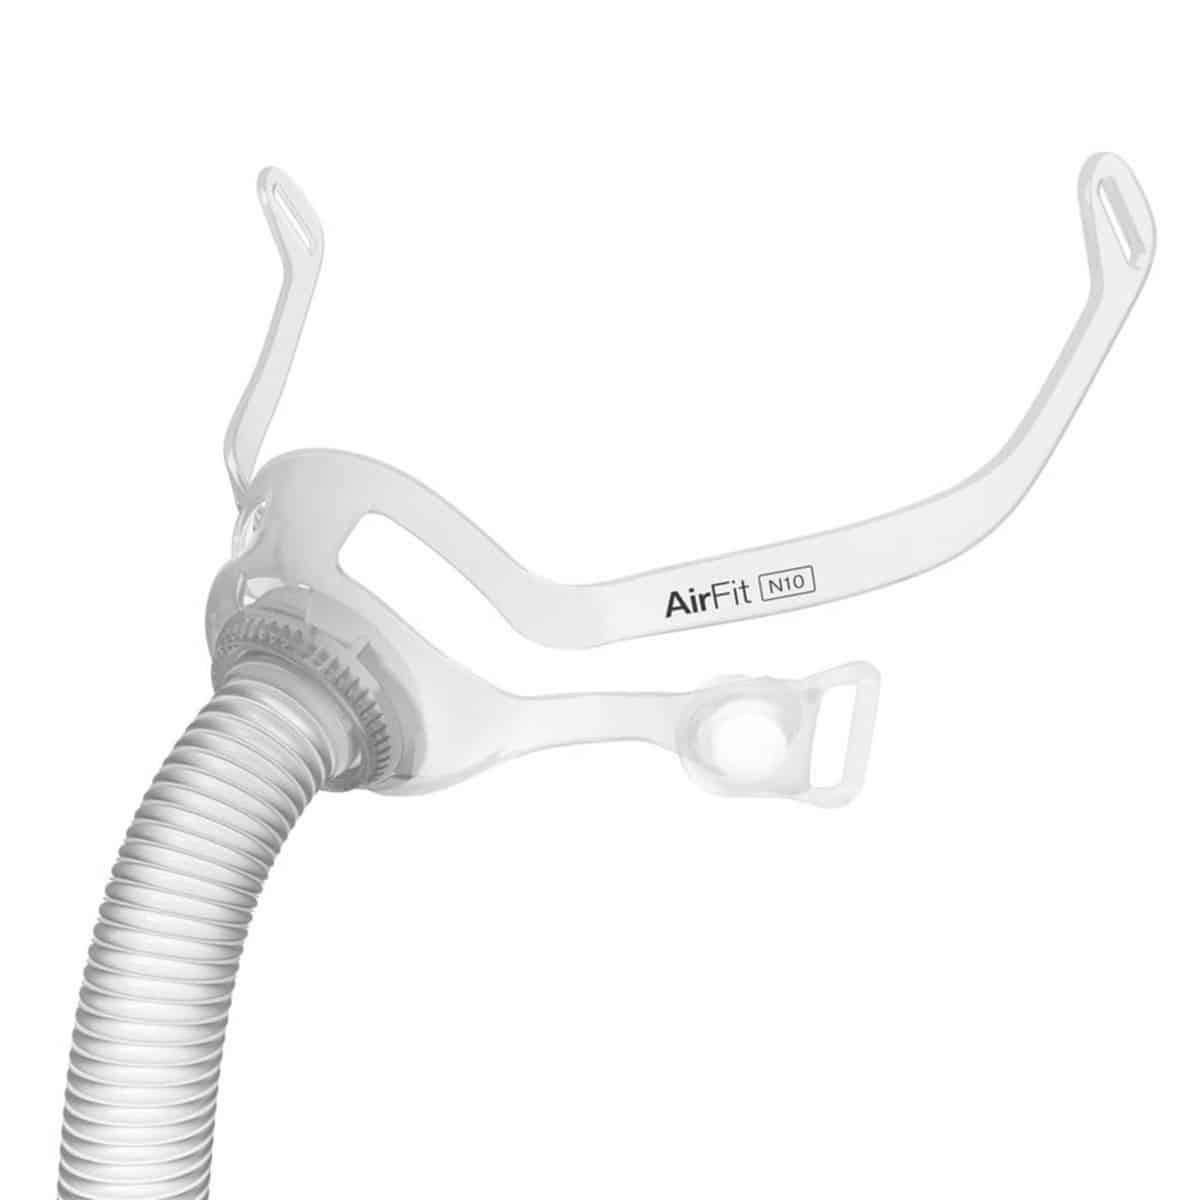 Featured image for “ResMed AirFit N10 Frame”